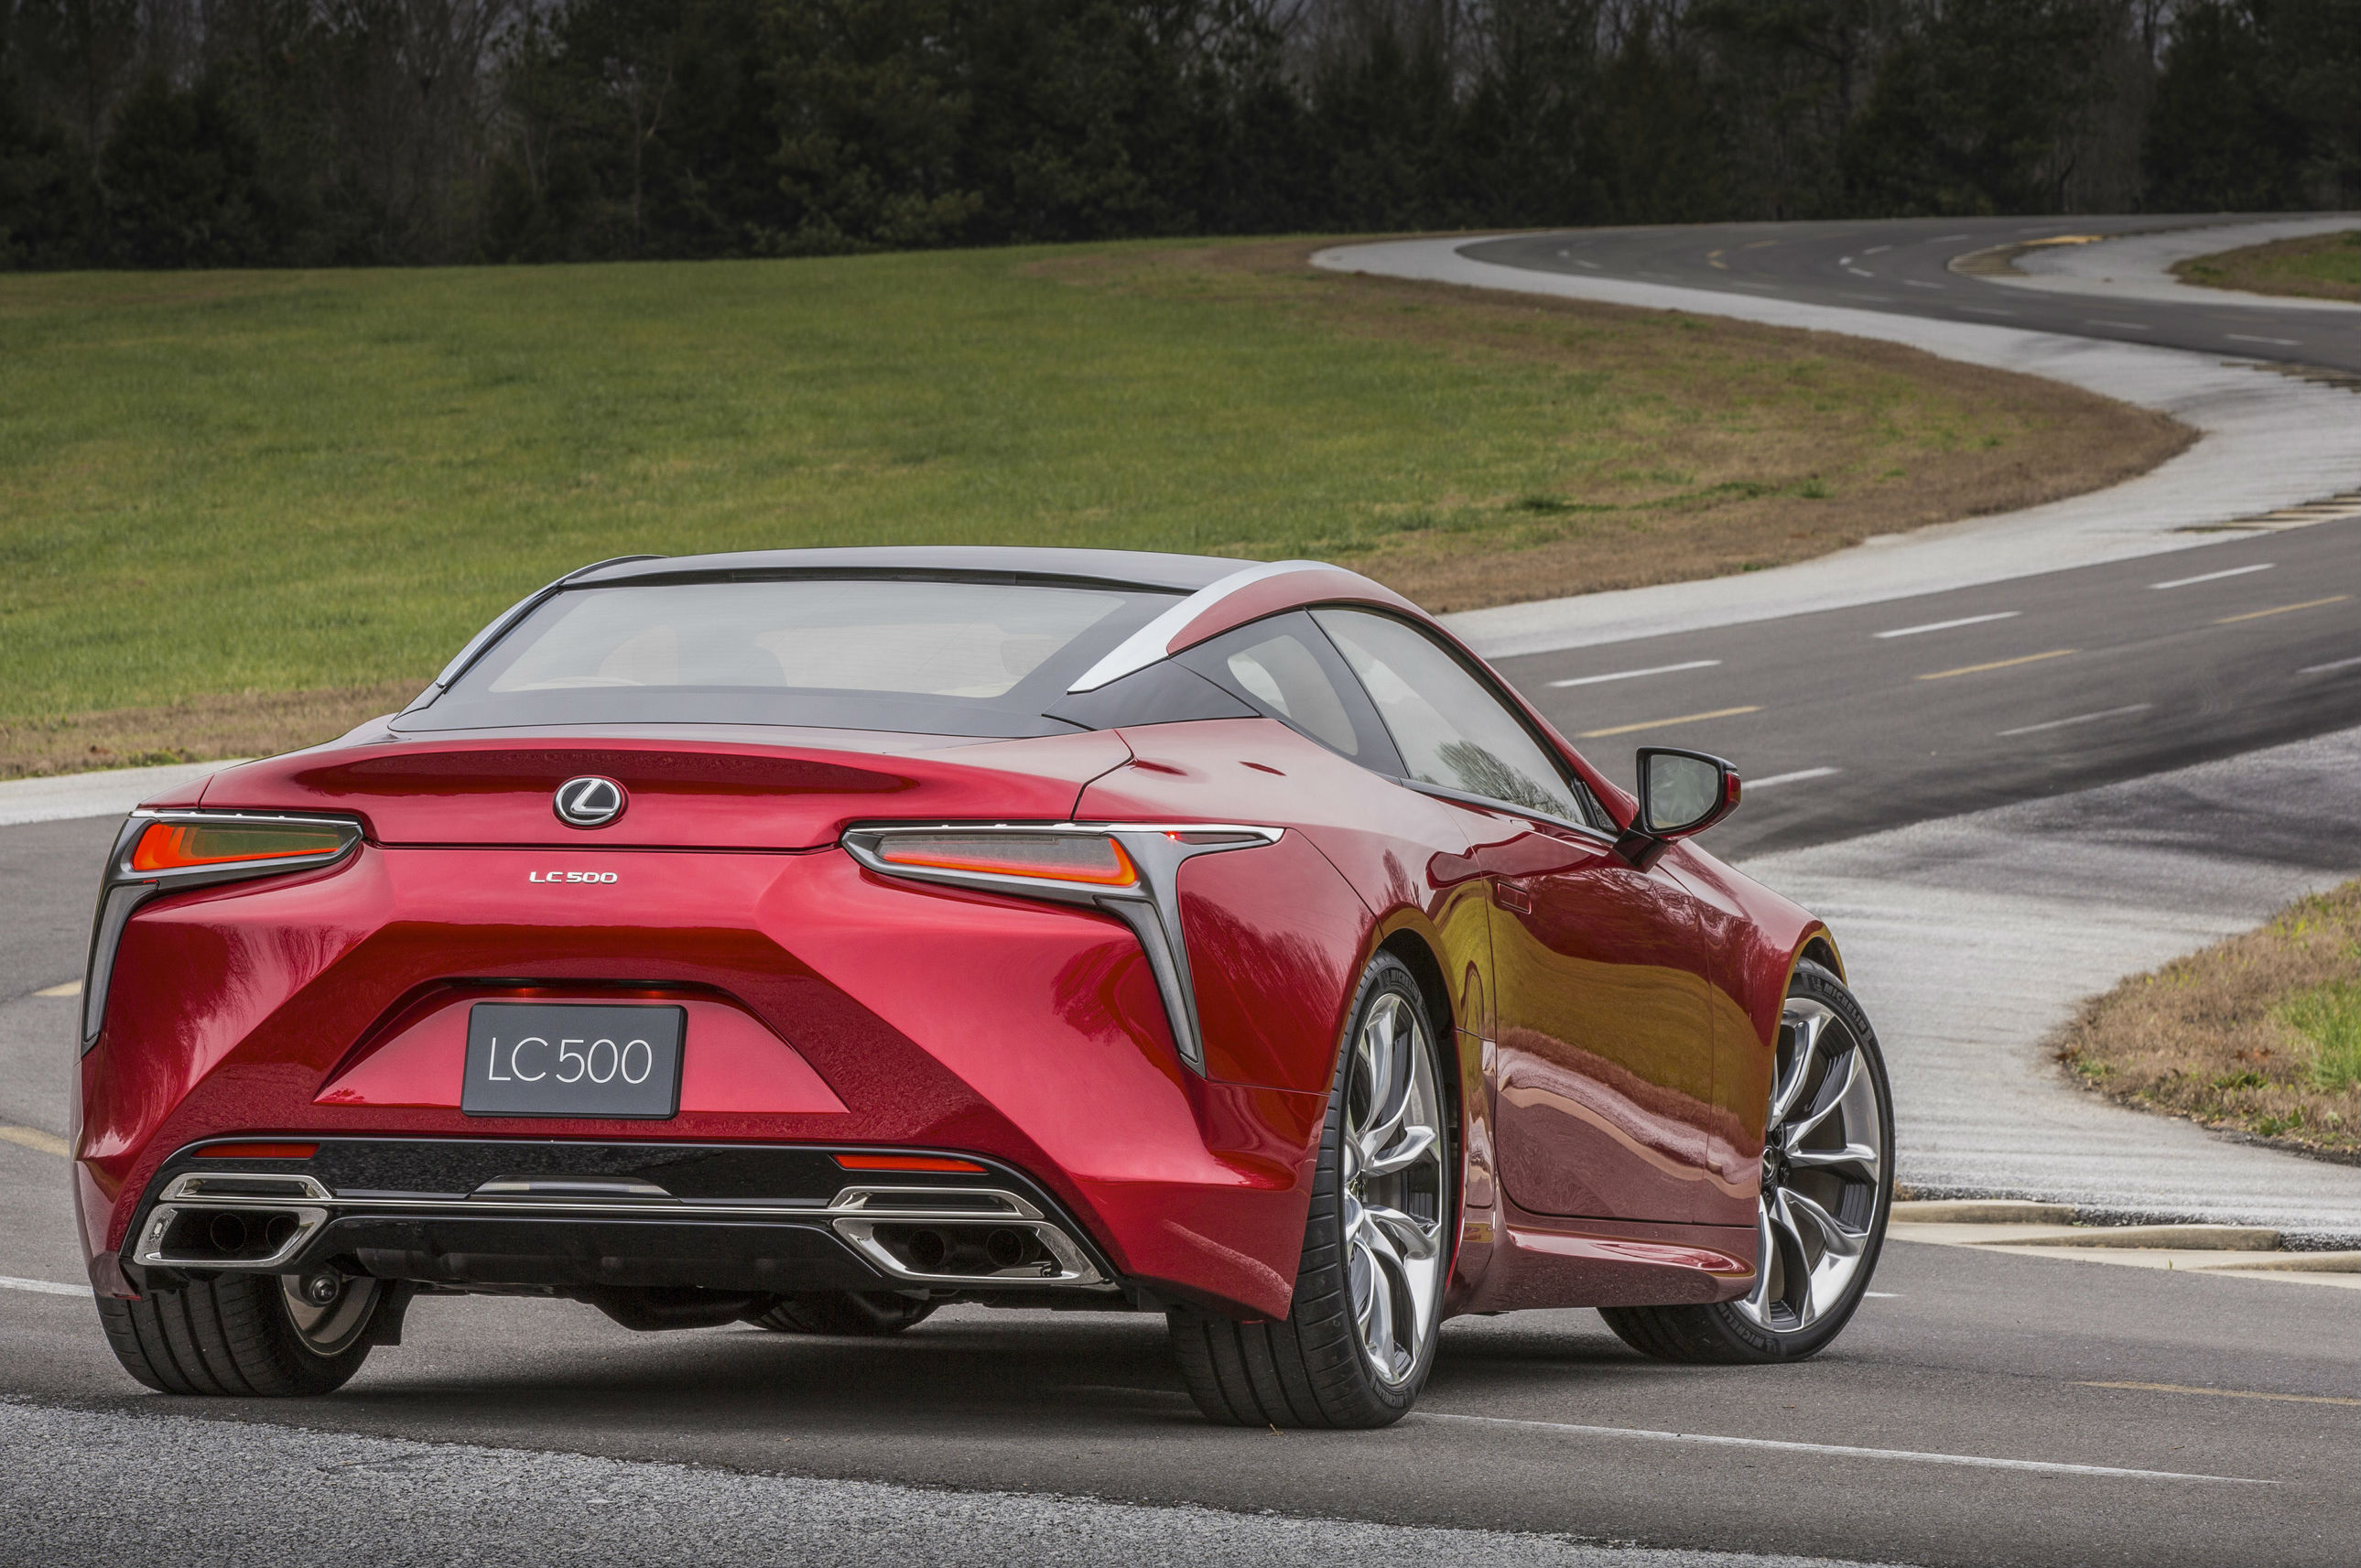 The Lexus LC 500 was revealed at the 2016 Detroit motor show